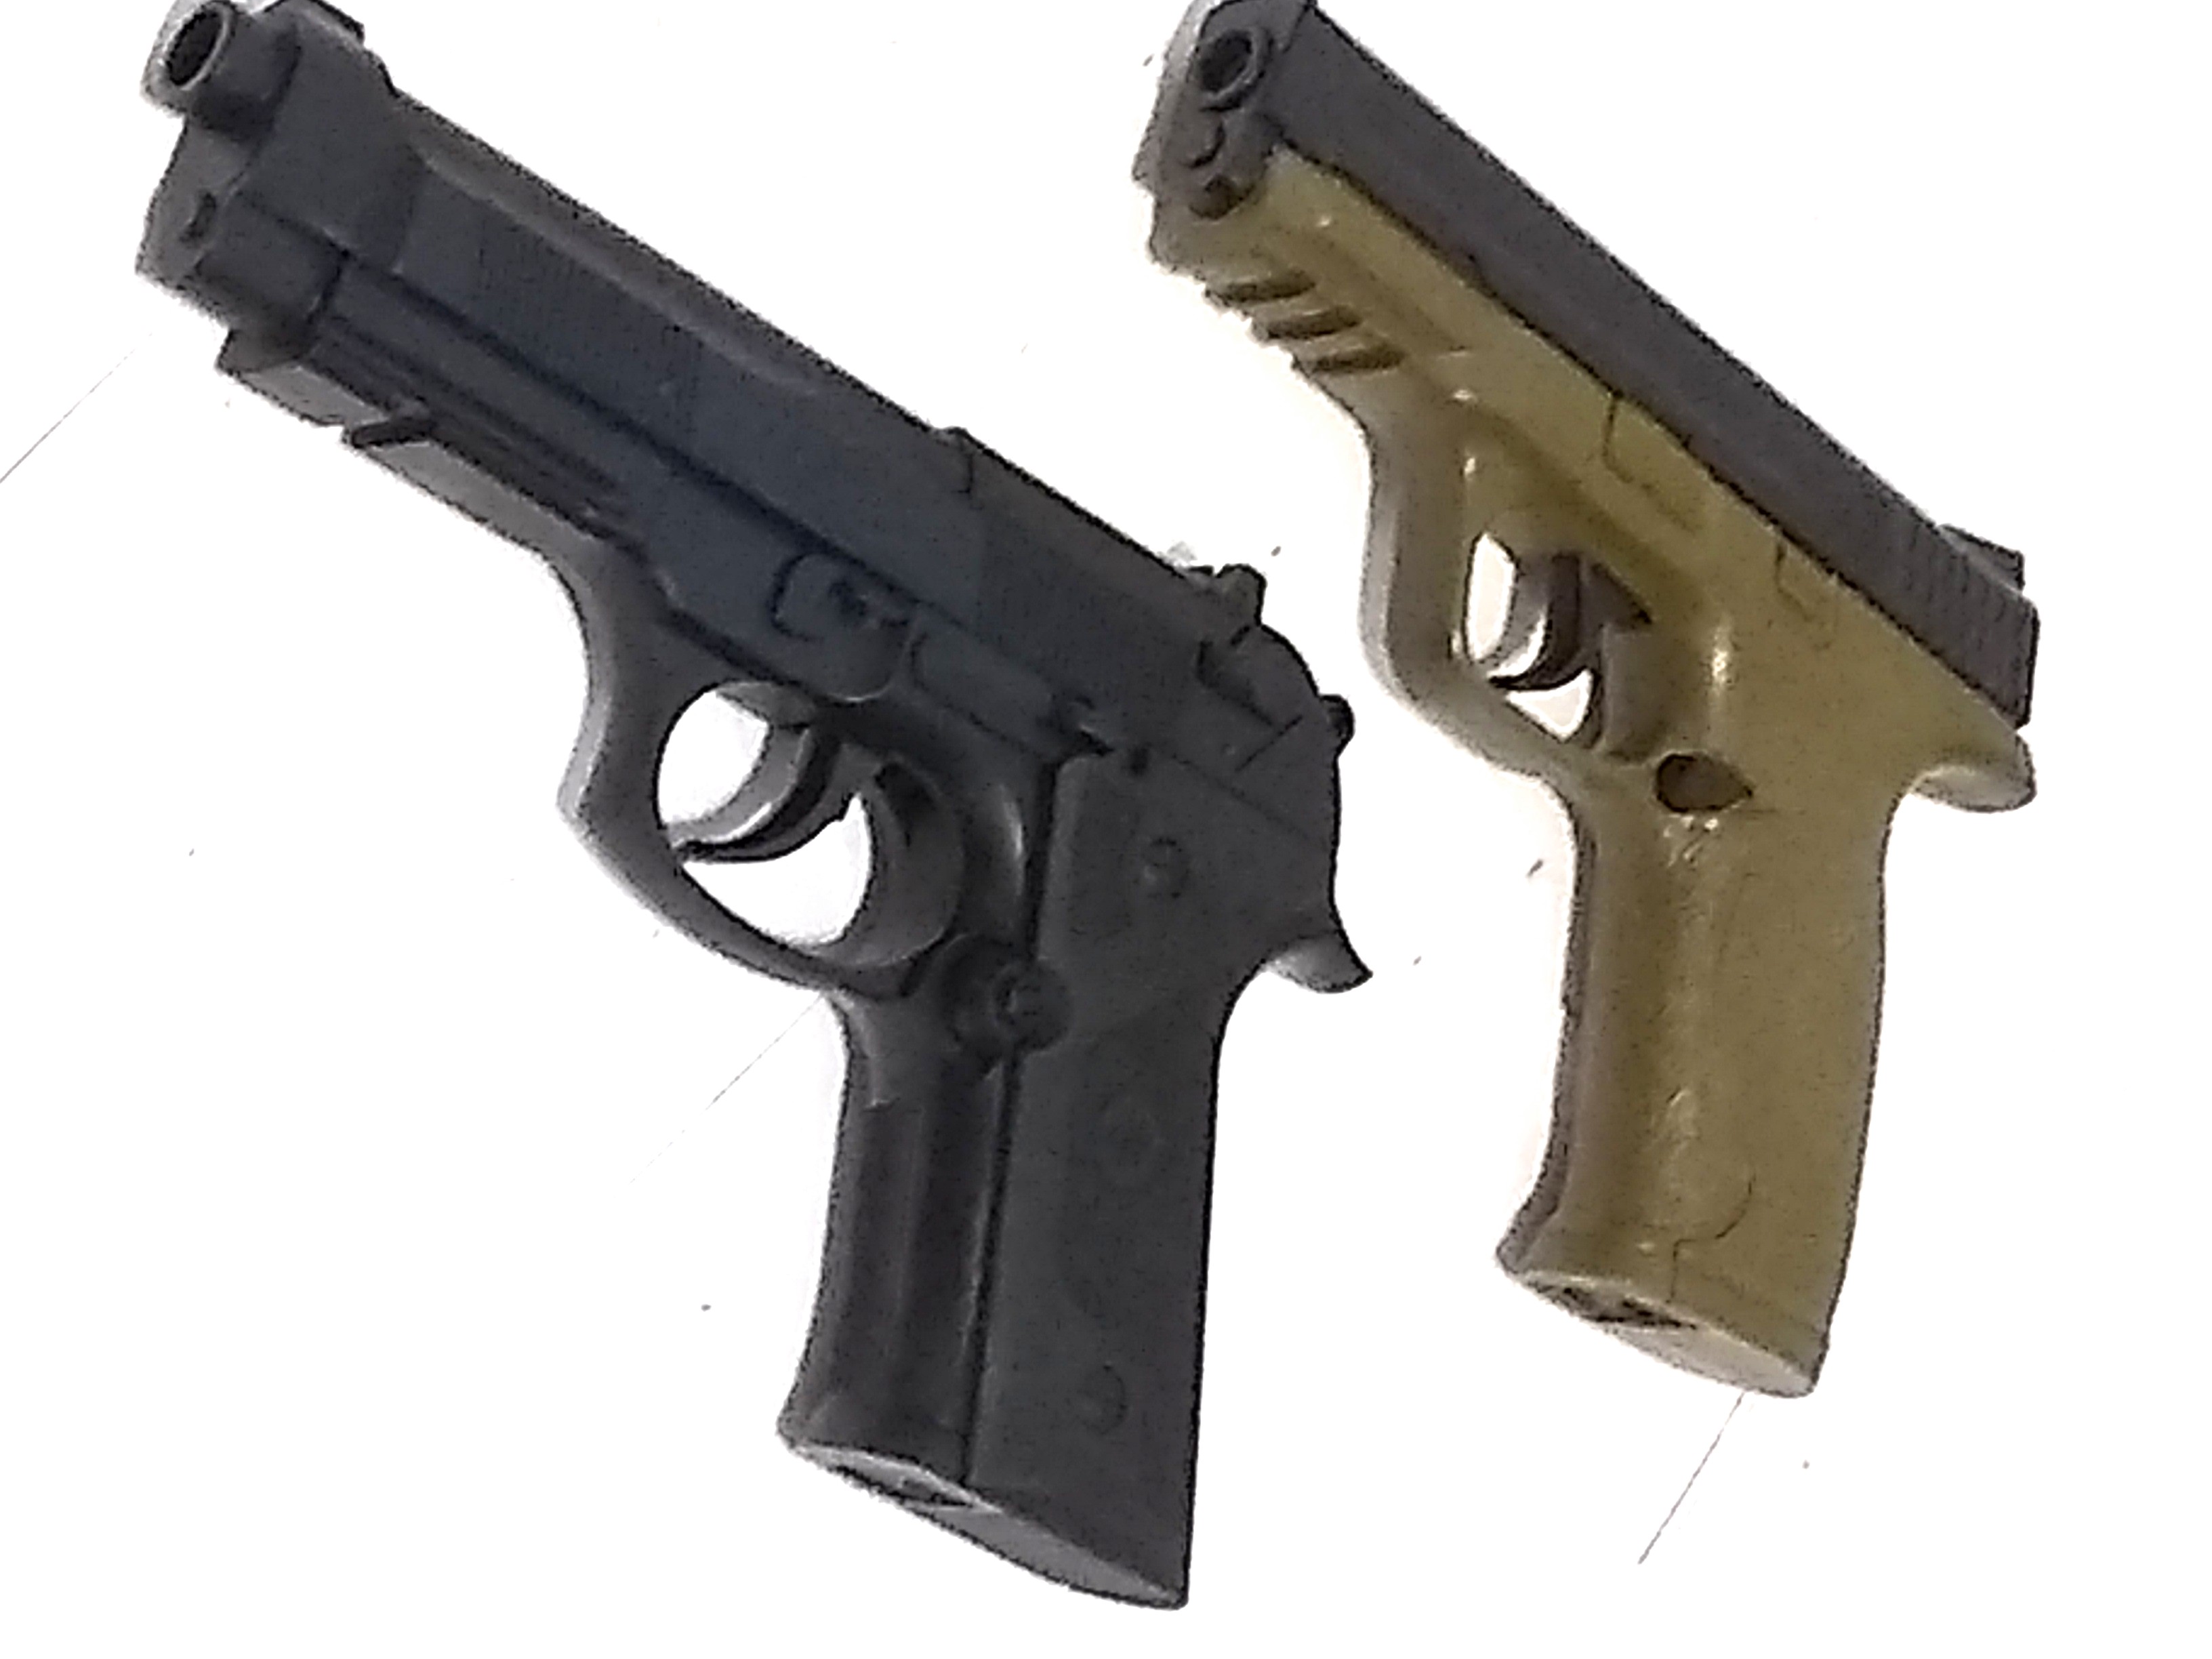 2 CO2 4.5 mm BB PISTOLS FOR REPAIR